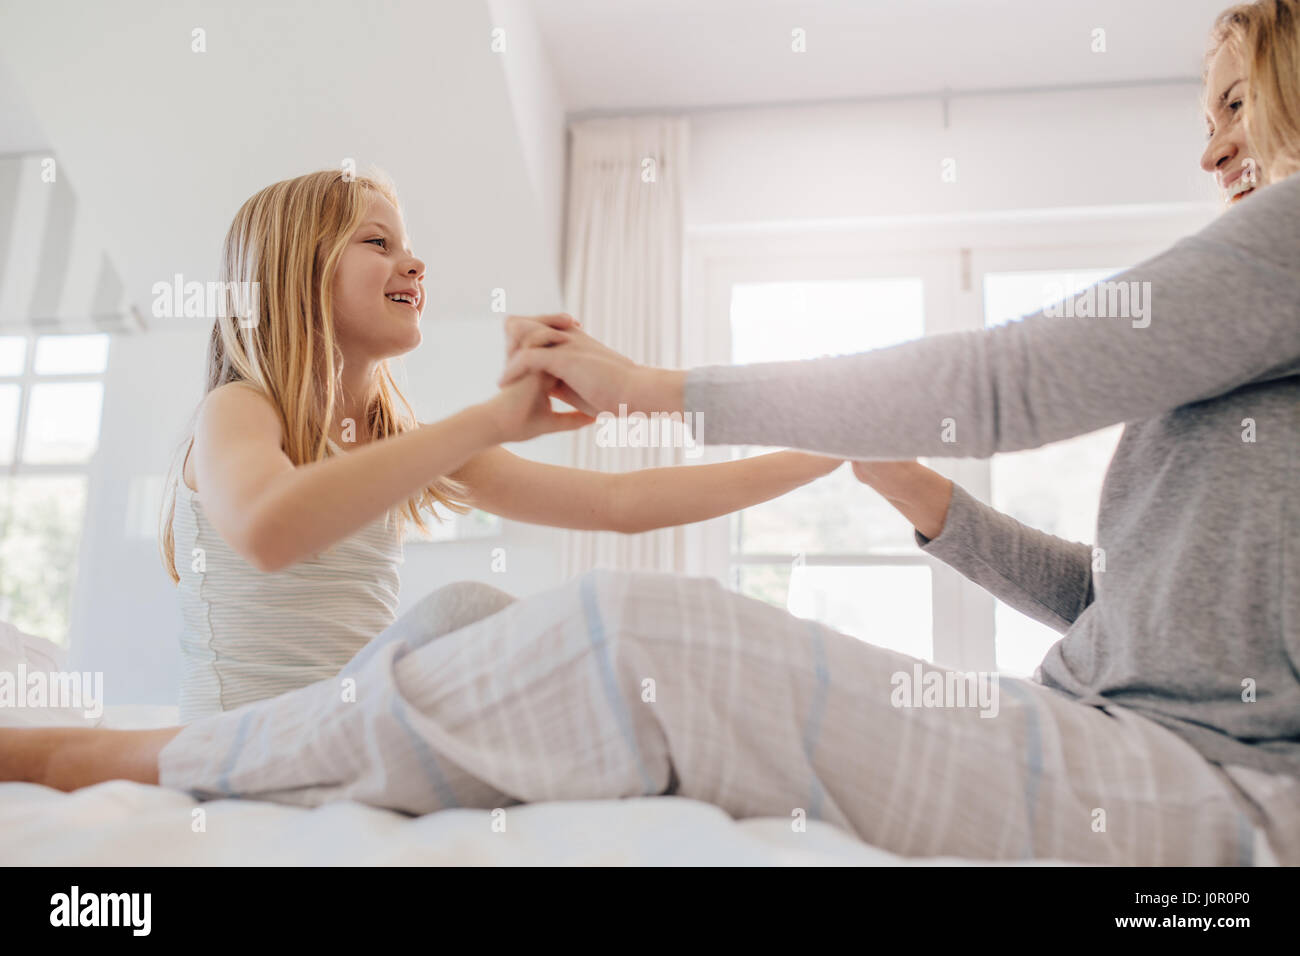 Indoor shot of little girl playing with her mother on bed. Mother and daughter sitting in bedroom holding hands. Stock Photo